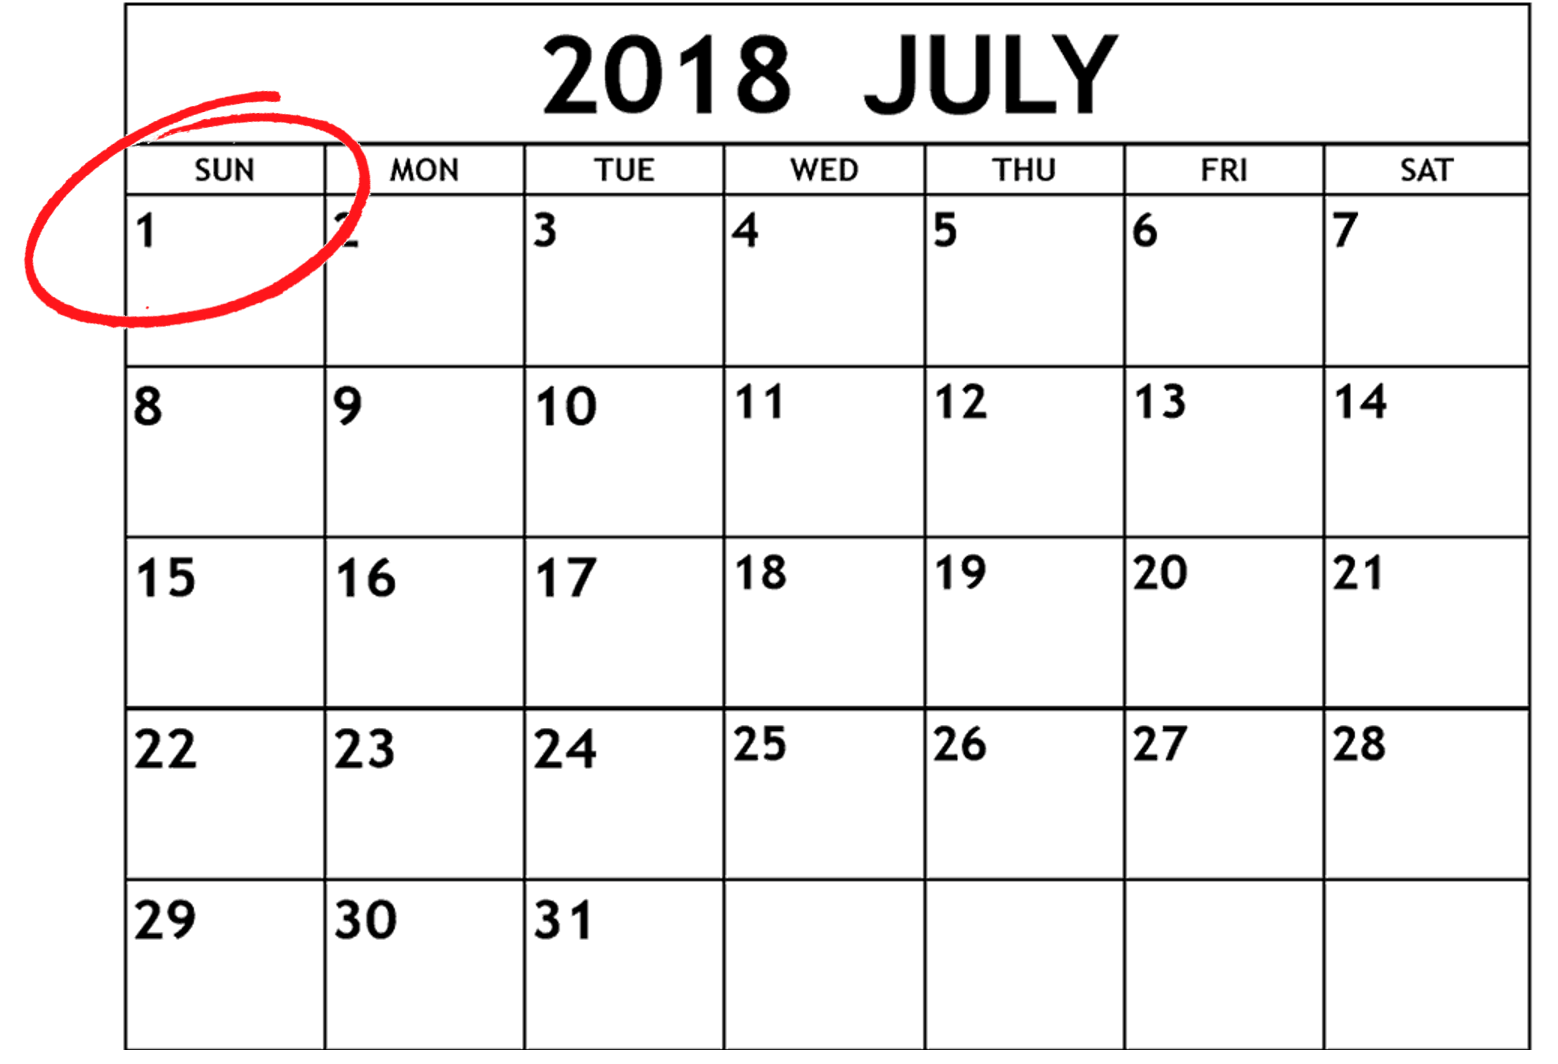 2018 calendar showing July 2018 with the 1st circled